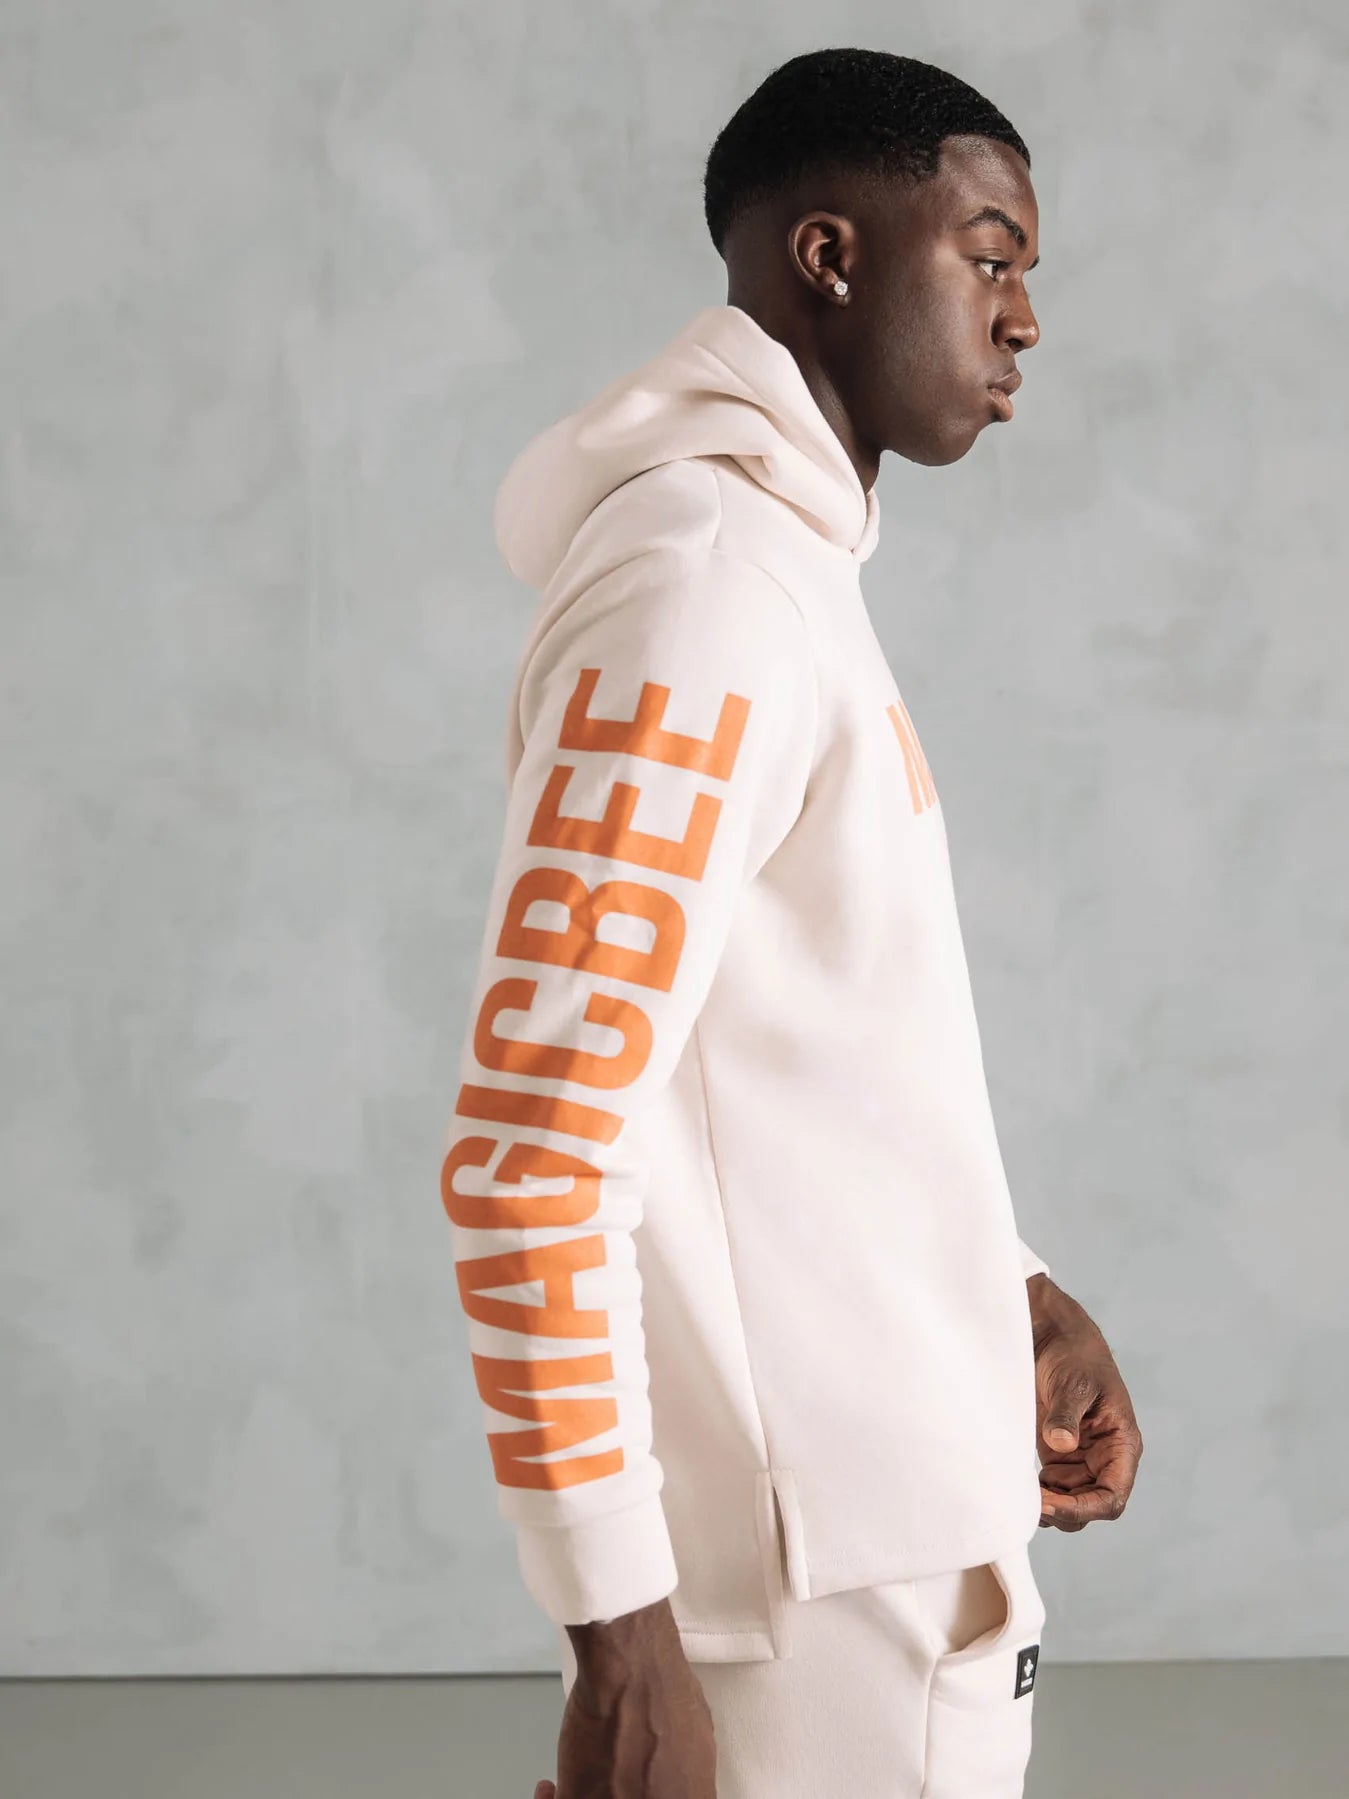 MAGICBEE DOUBLE LOGO HOODIE -WHITE PINK (7818223714562)